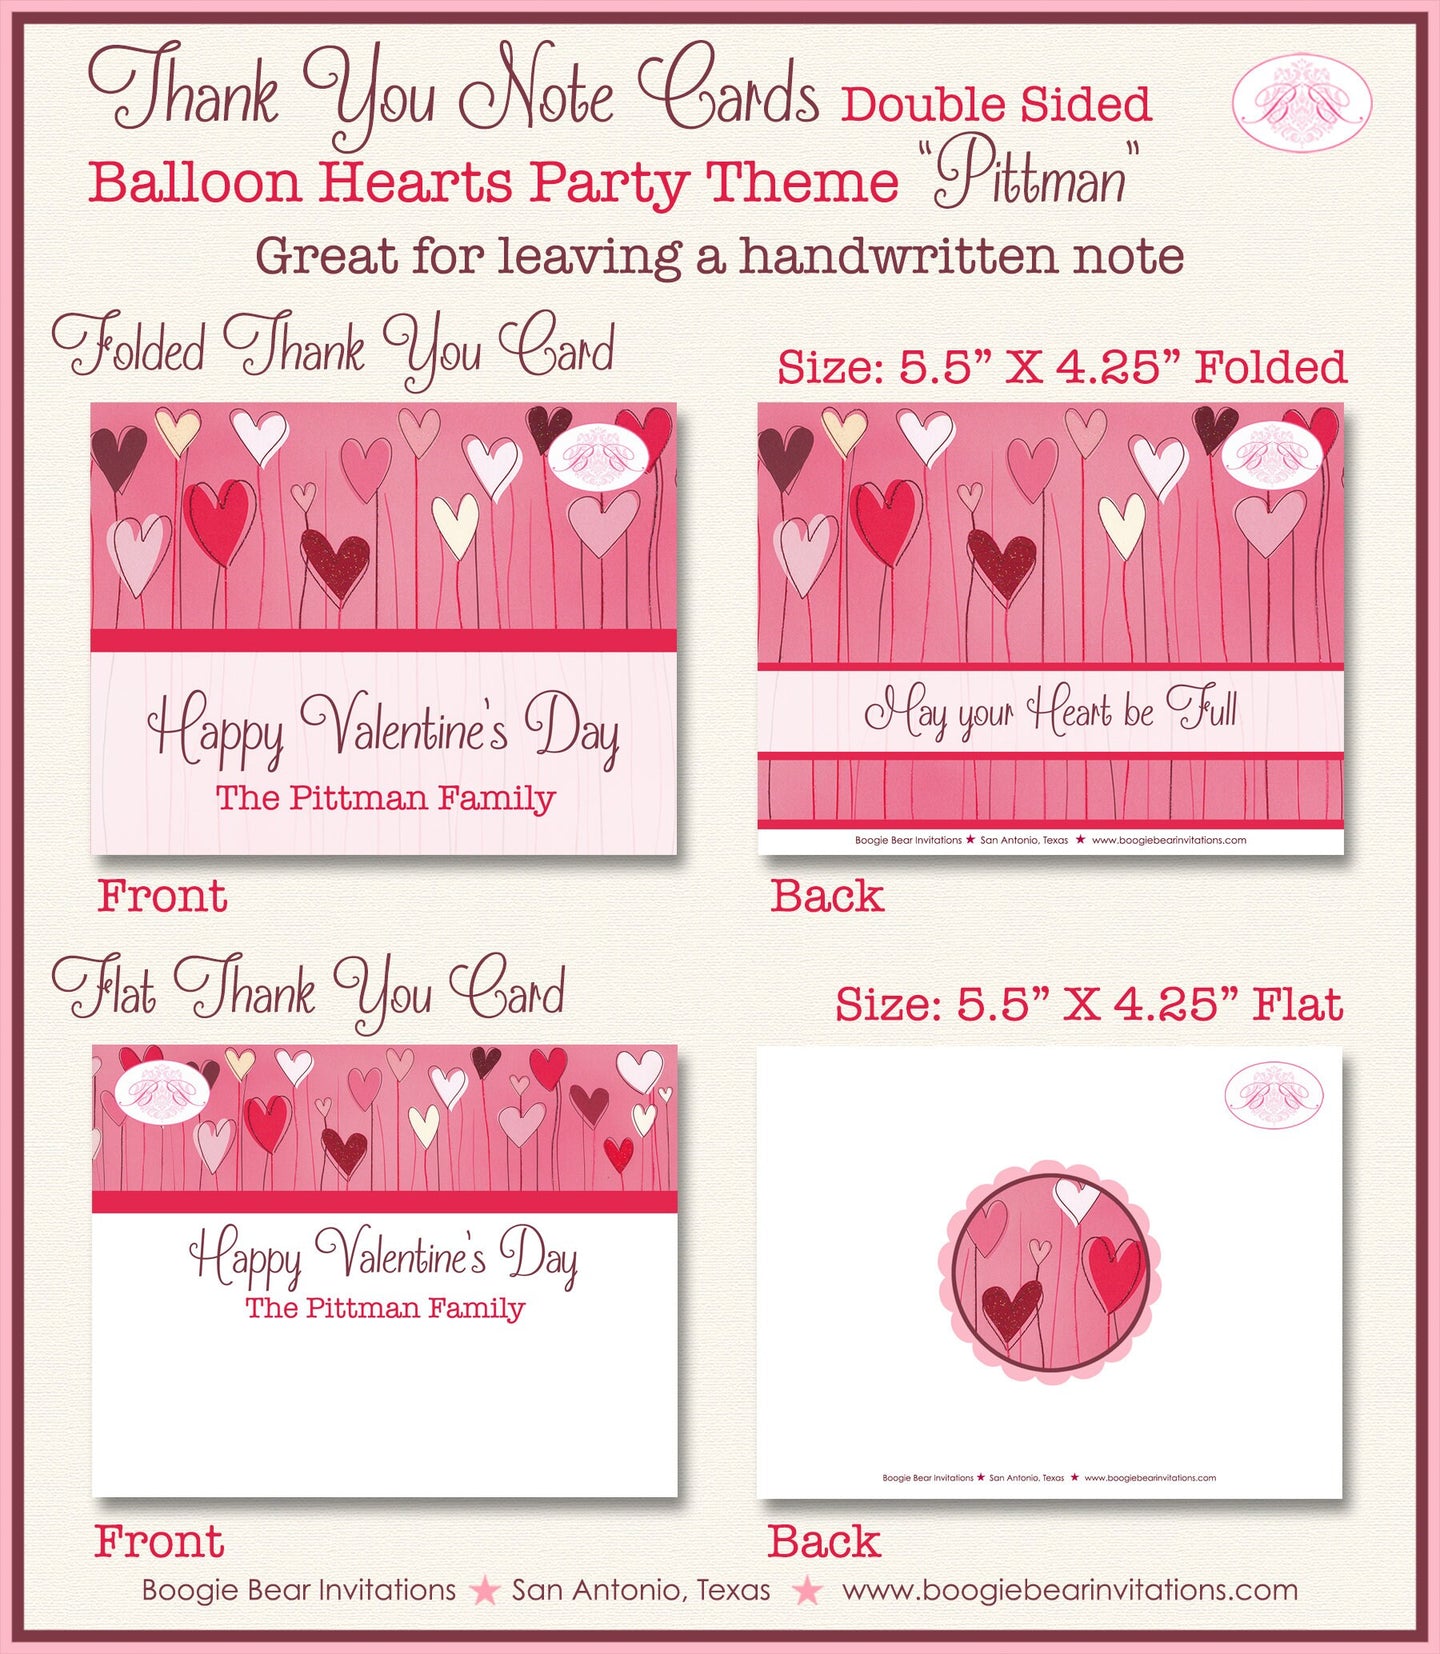 Balloon Hearts Valentine Thank You Card Party Day Birthday Red White Pink Holiday Dinner Love Boogie Bear Invitations Pittman Theme Printed